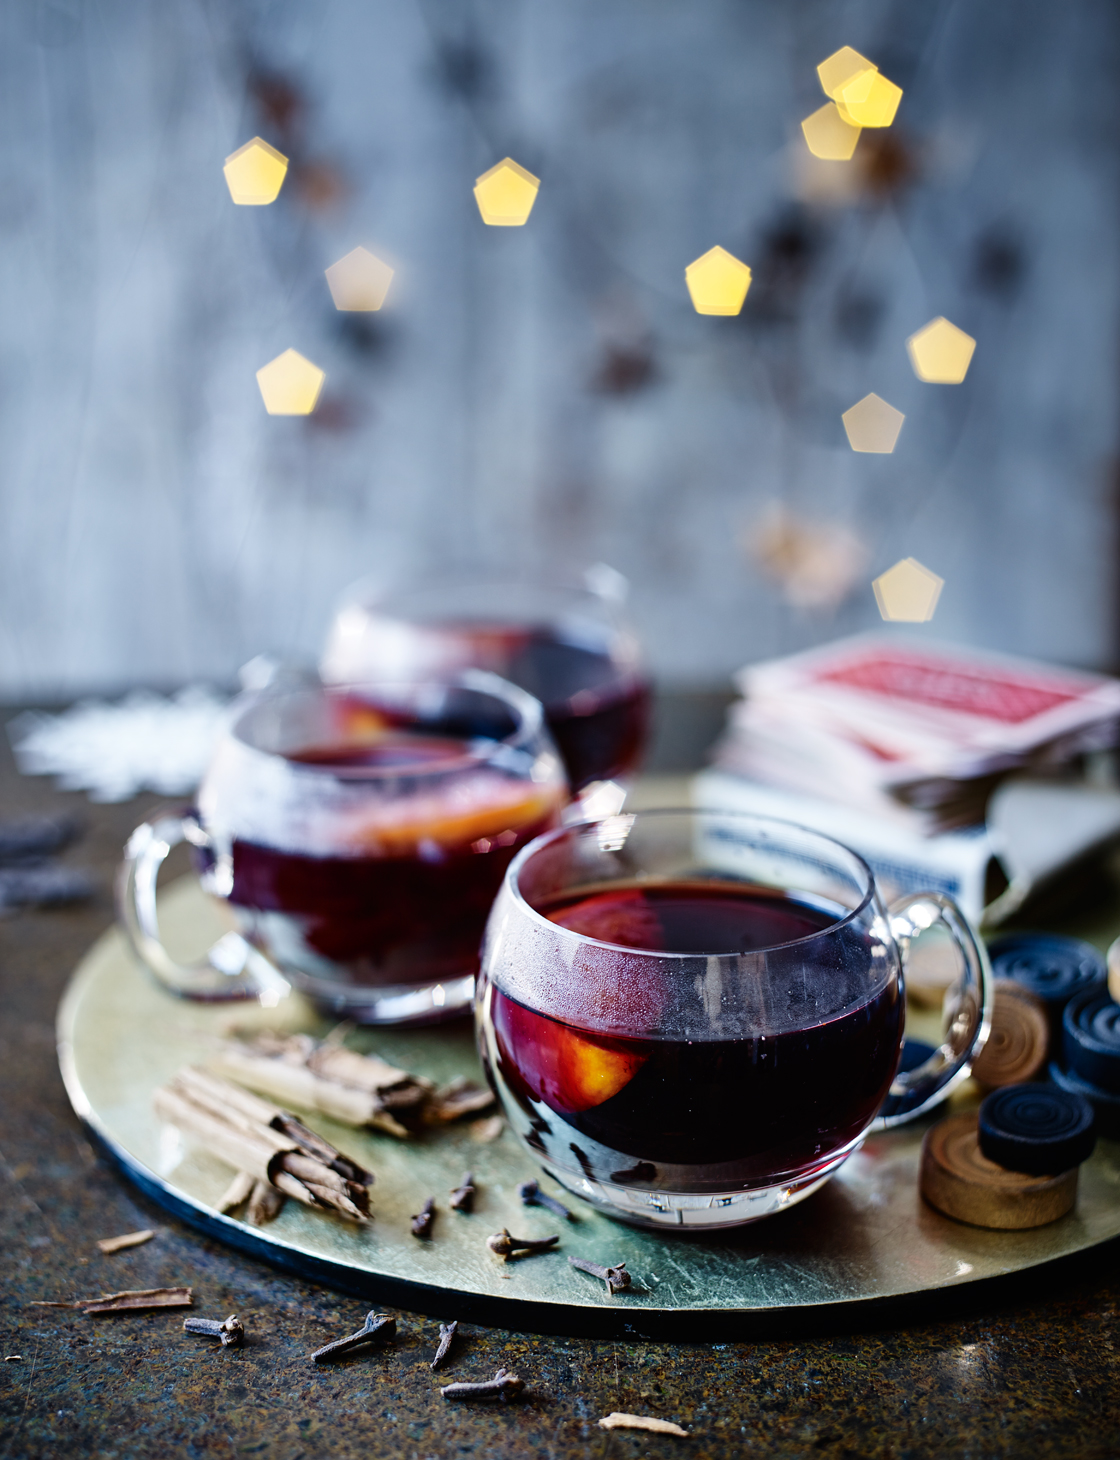 Traditional mulled wine